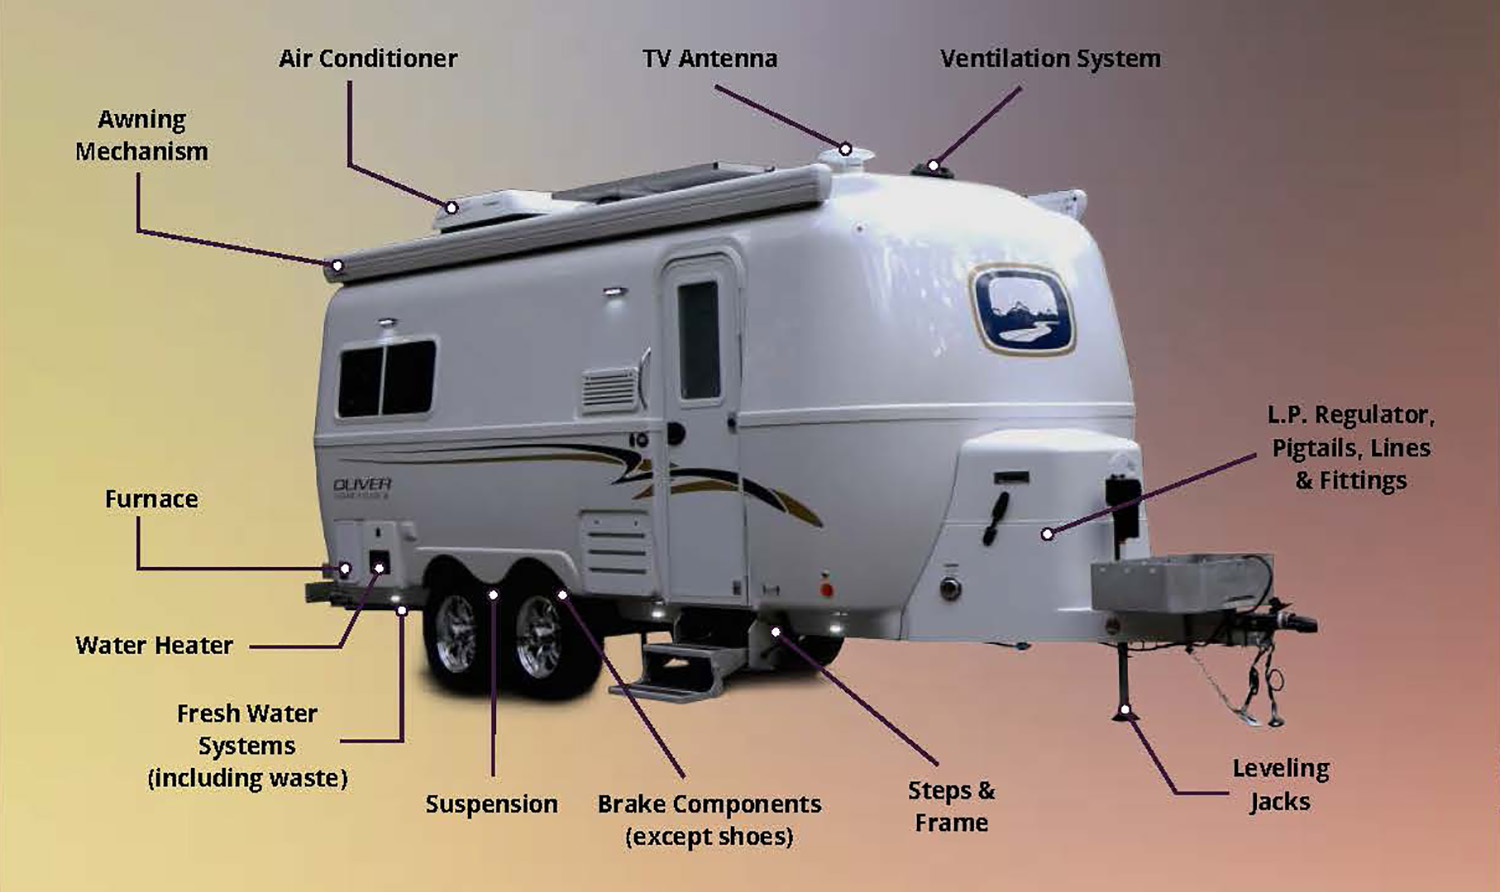 Extended Warranty Oliver Travel Trailers